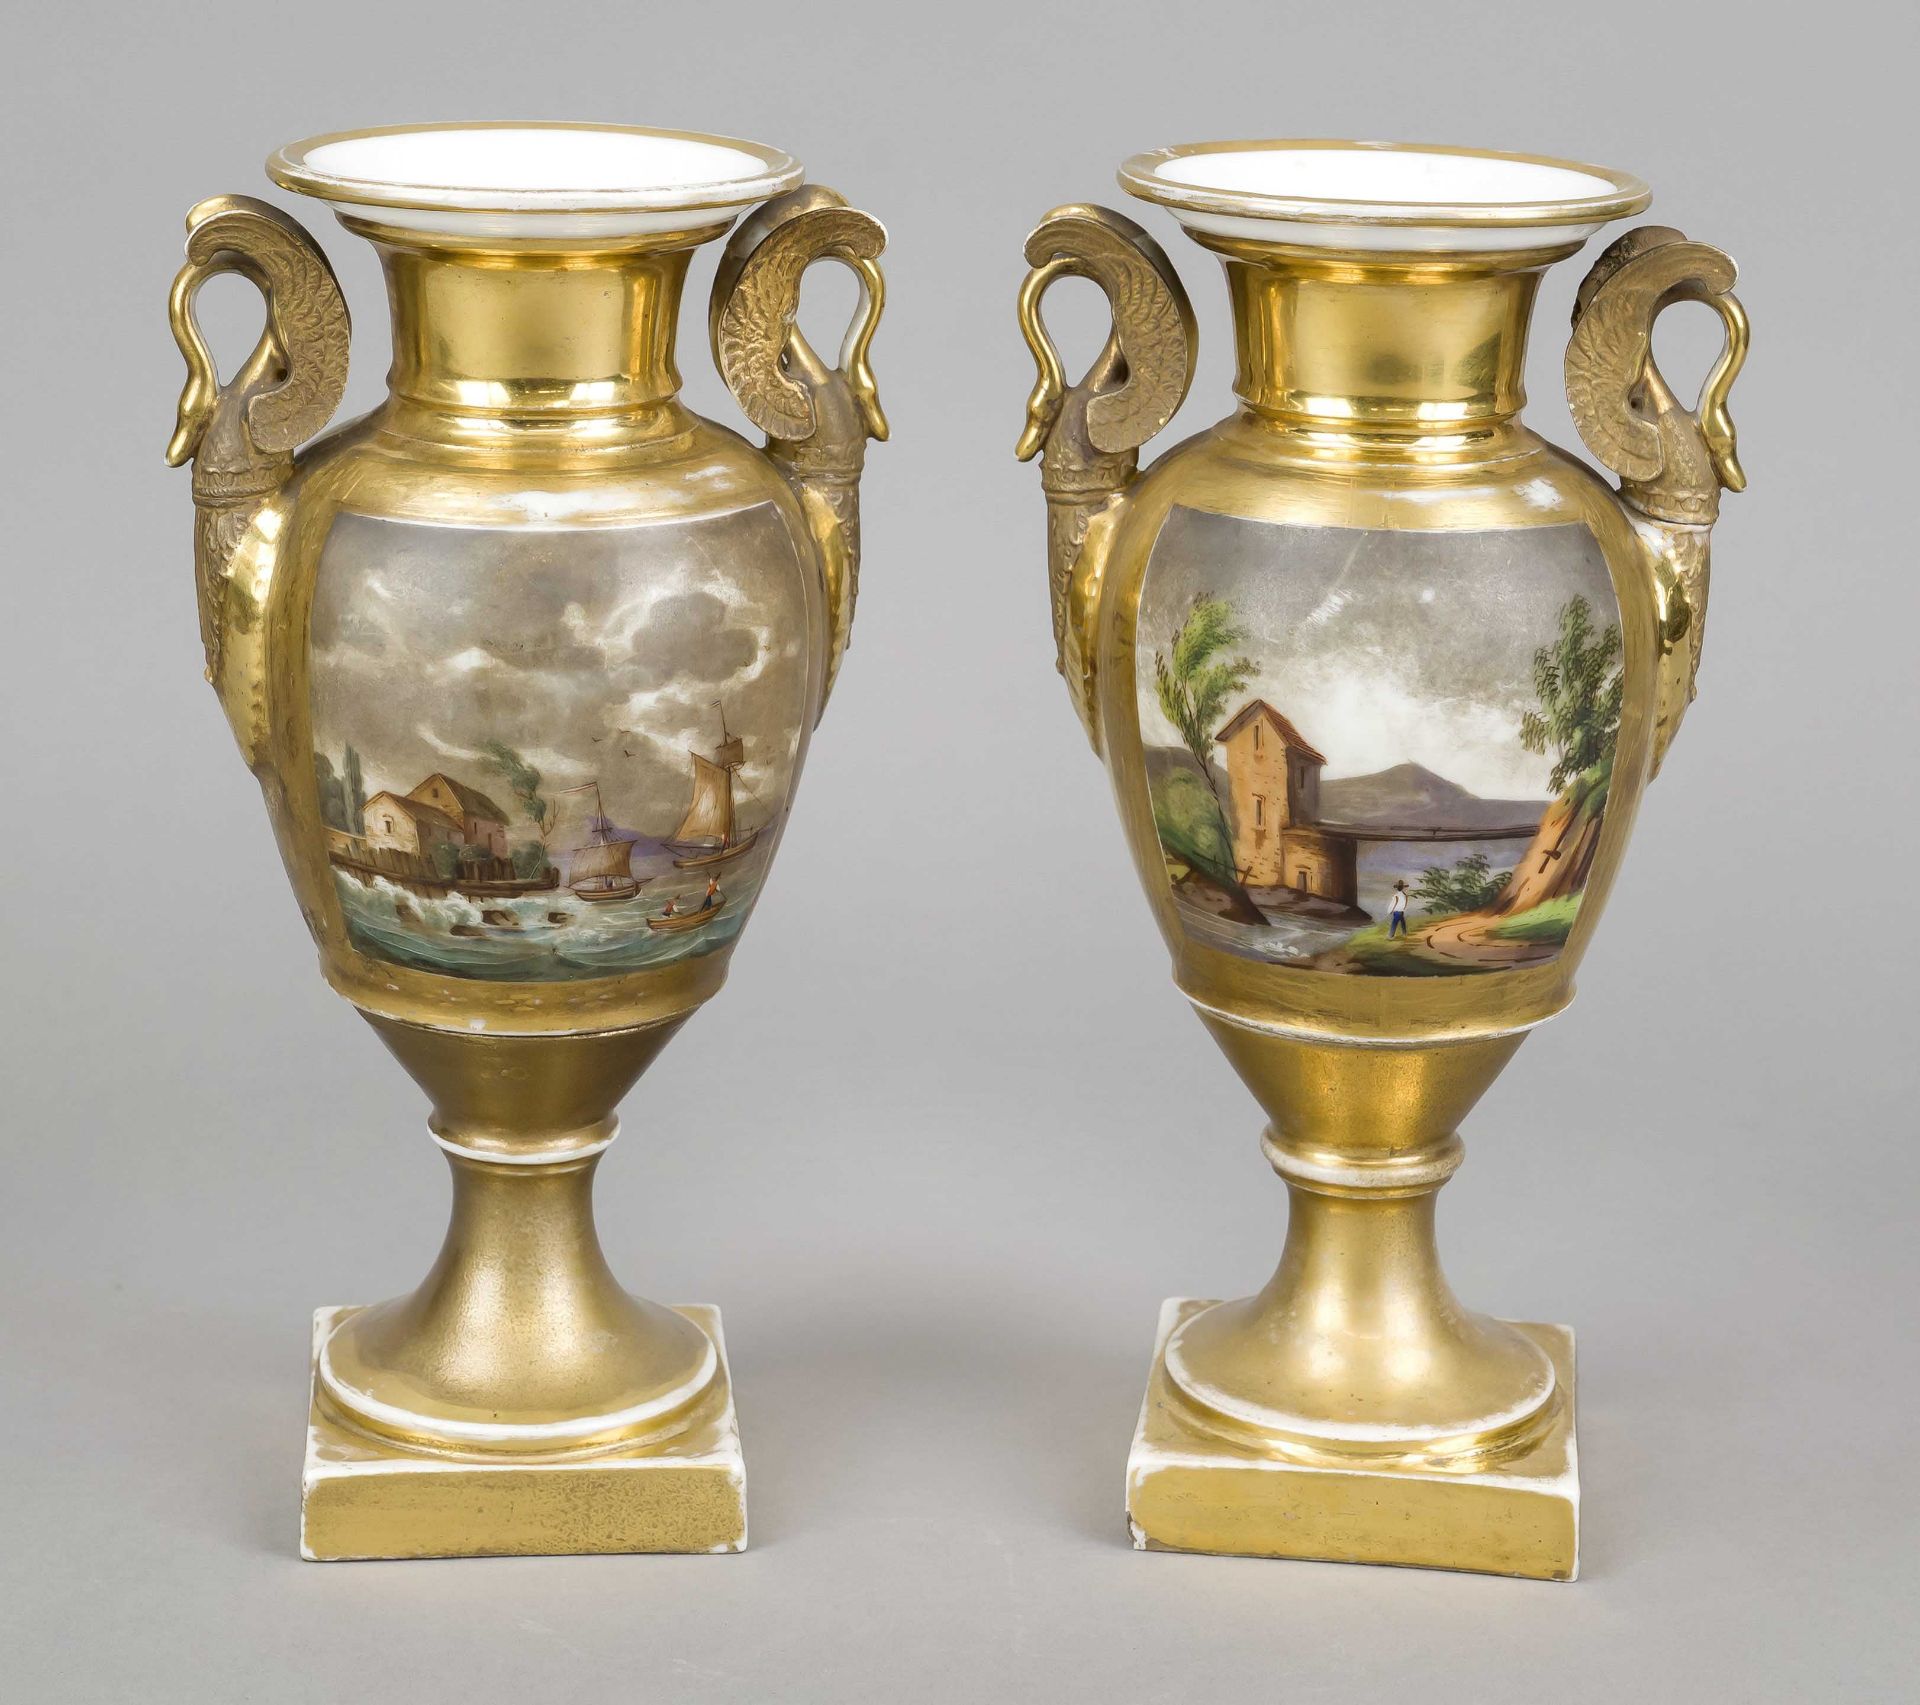 A pair of ornamental vases with swan handles, France, 19th century, polychrome painting with